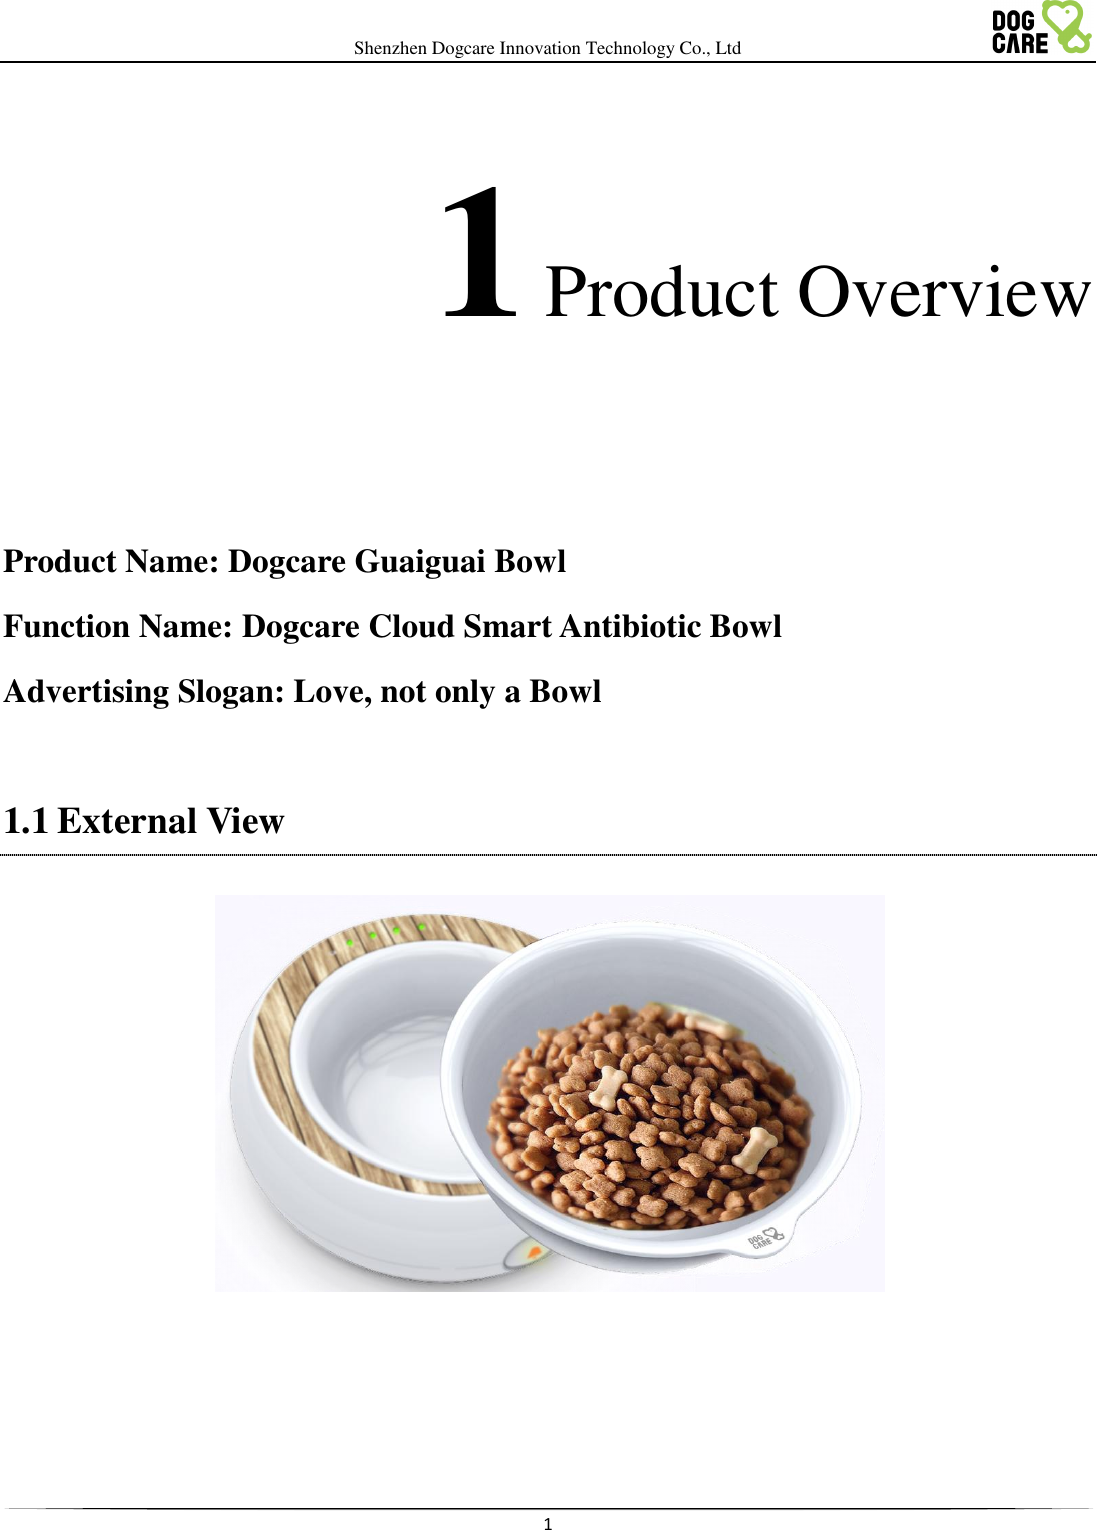  Shenzhen Dogcare Innovation Technology Co., Ltd    1   1 Product Overview   Product Name: Dogcare Guaiguai Bowl Function Name: Dogcare Cloud Smart Antibiotic Bowl Advertising Slogan: Love, not only a Bowl  1.1 External View       